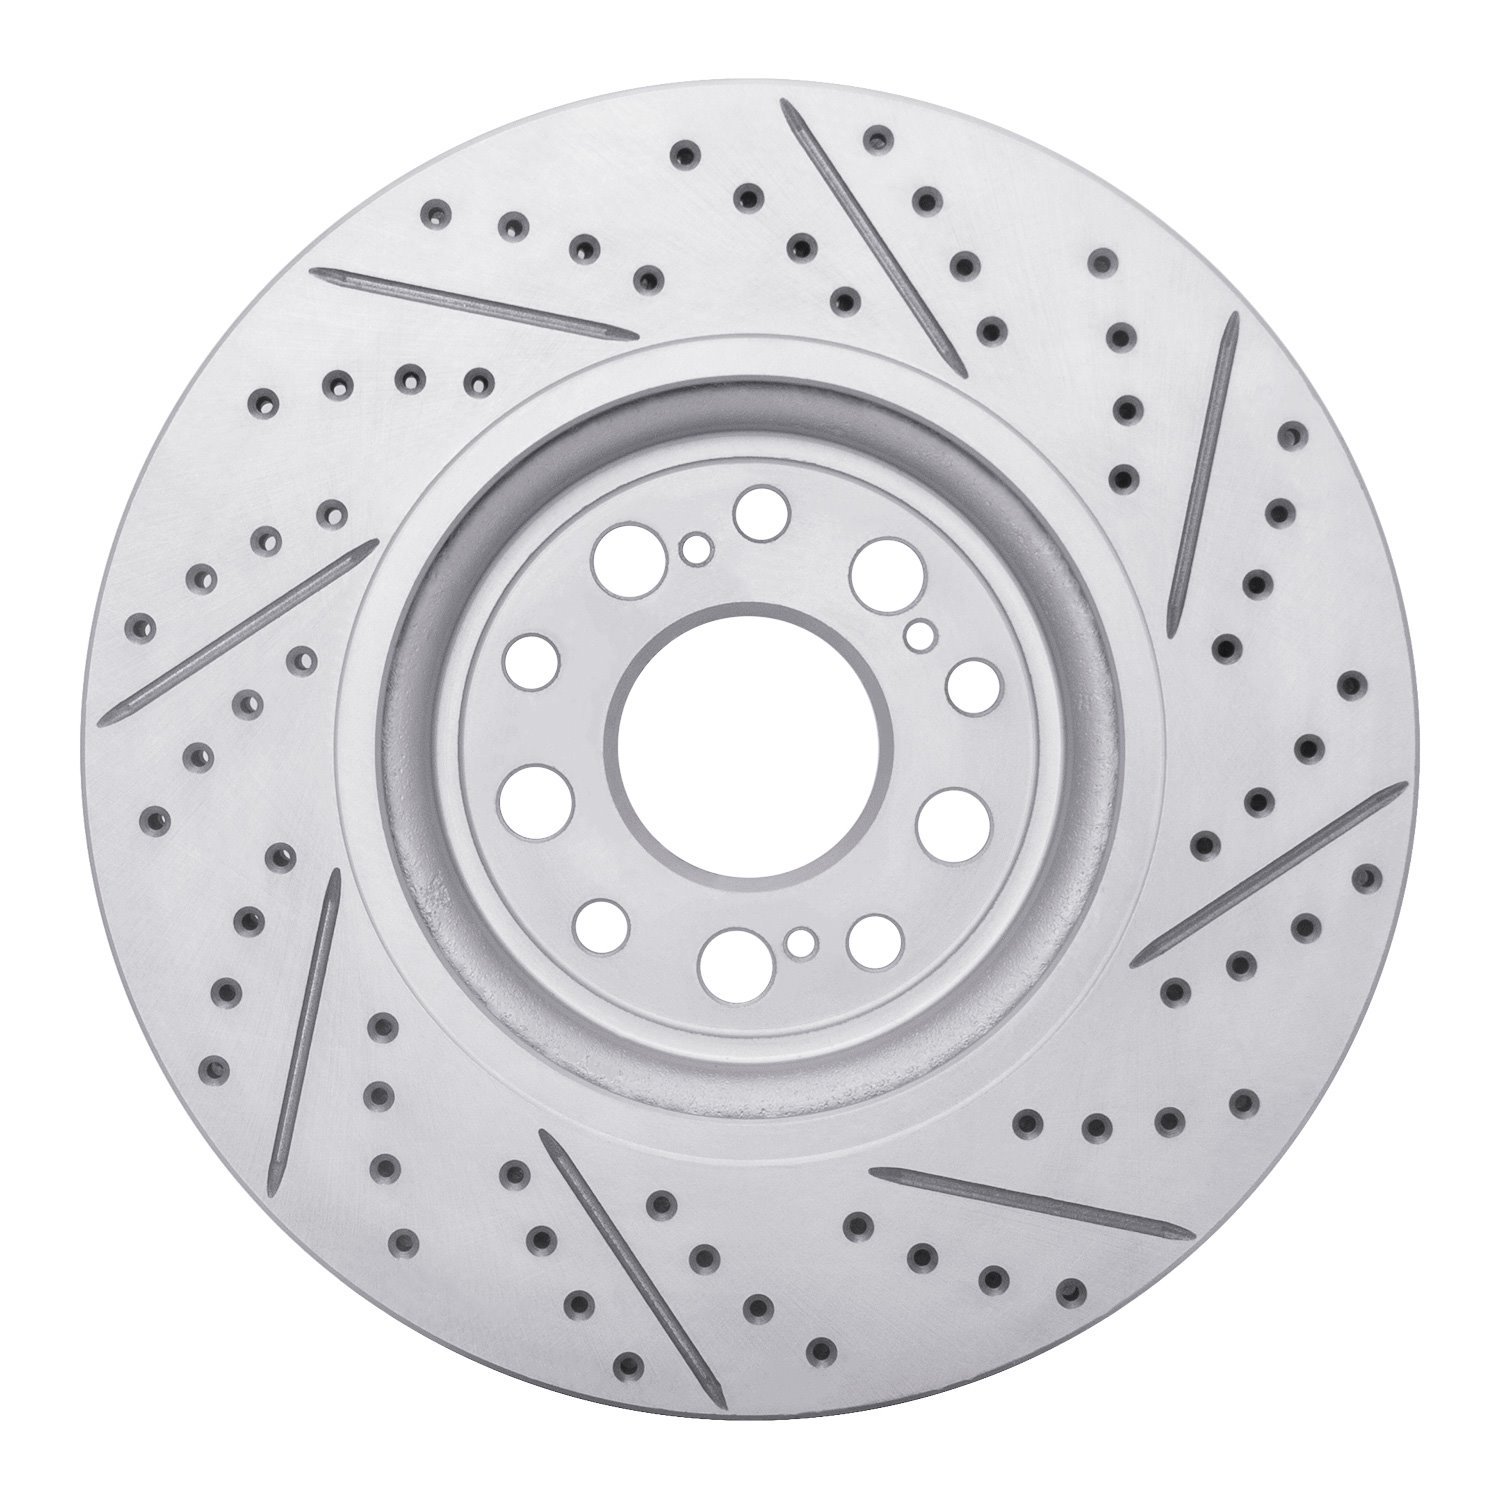 830-59069L Geoperformance Drilled/Slotted Brake Rotor, Fits Select Acura/Honda, Position: Front Left